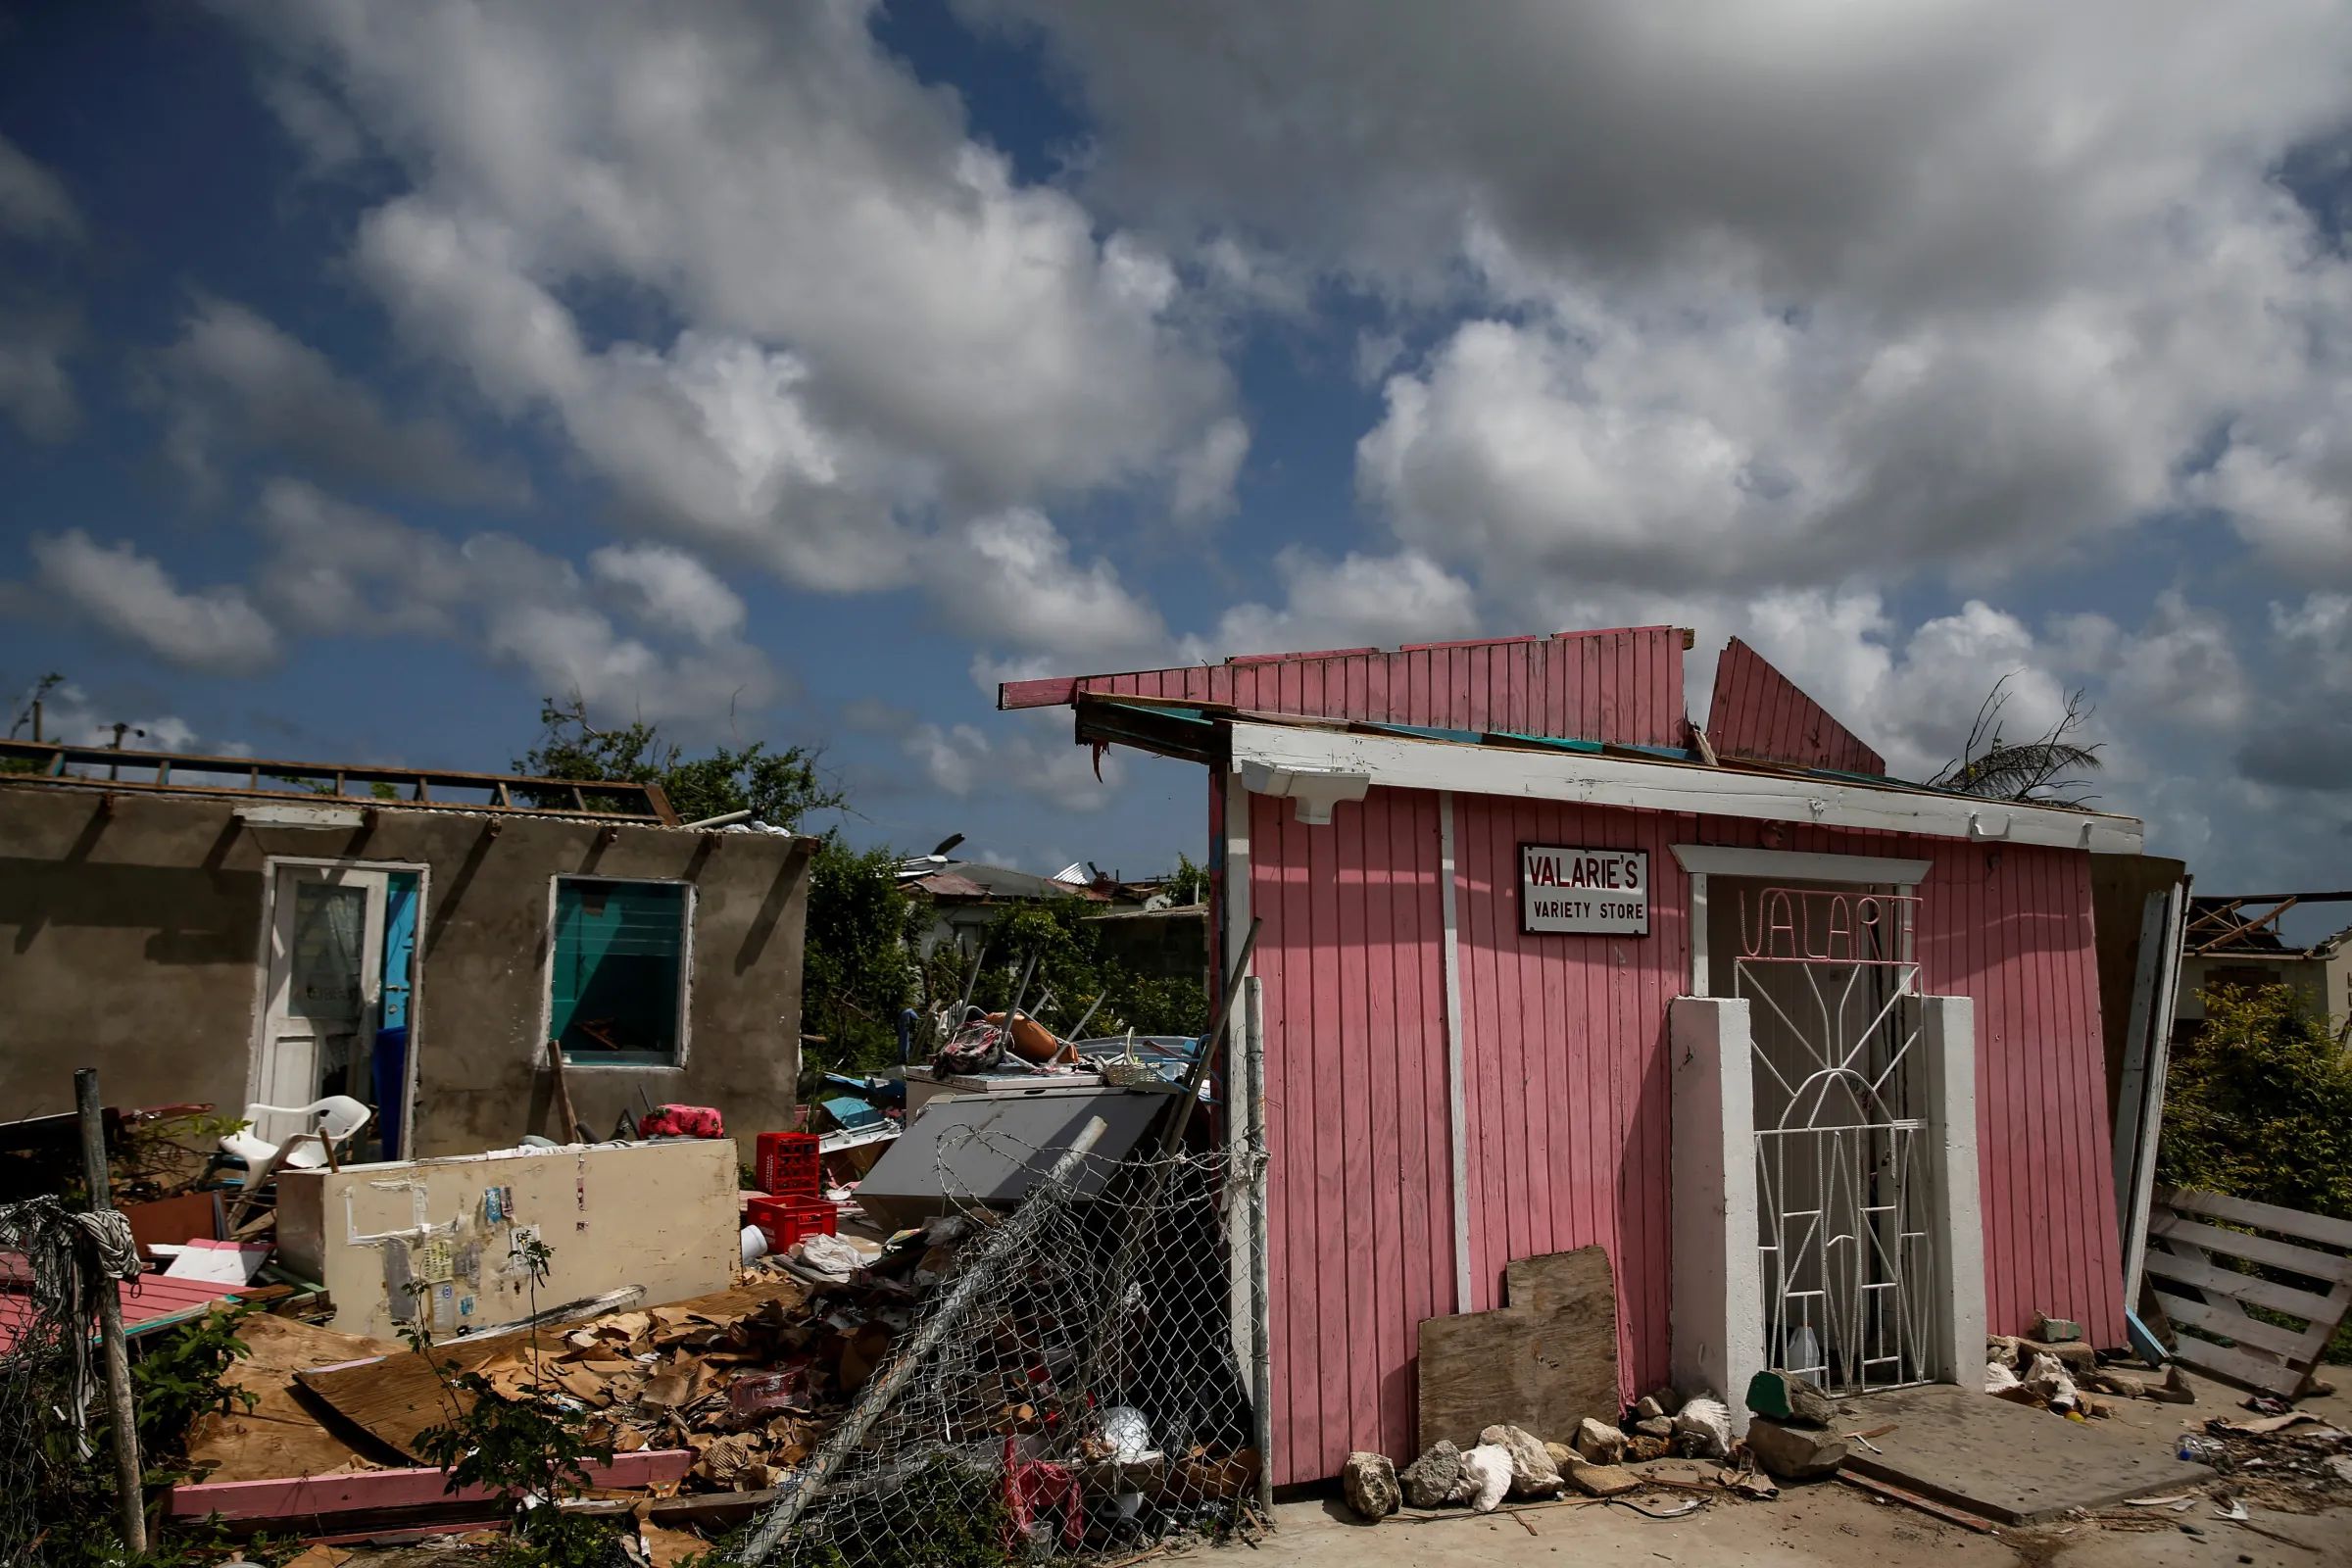 Homes sit in ruins at Codrington on the island of Barbuda just after a month after Hurricane Irma struck the Caribbean islands of Antigua and Barbuda, October 7, 2017. REUTERS/Shannon Stapleton